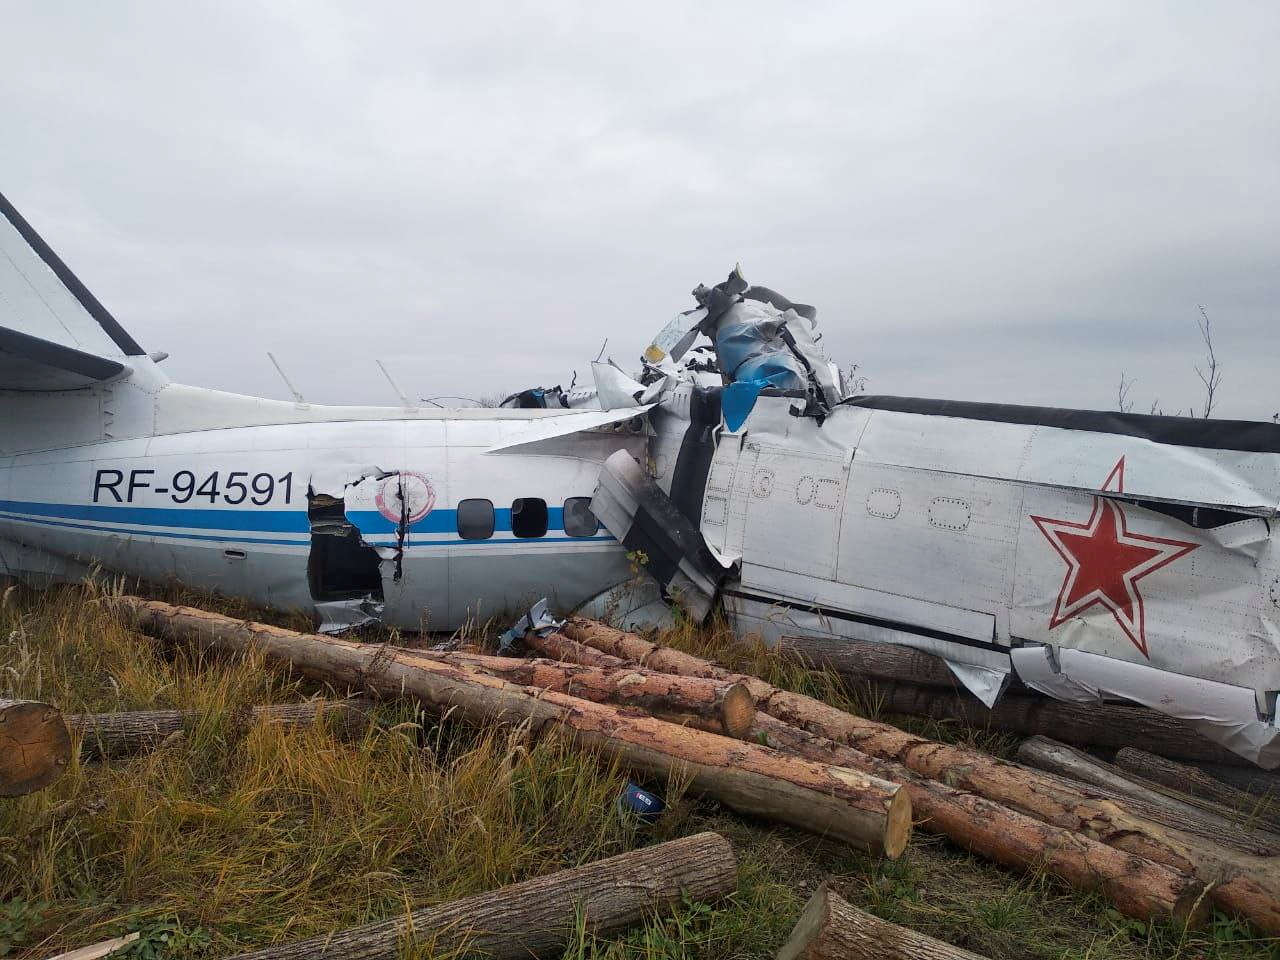 The wreckage of the L-410 plane is seen at the crash site near Menzelinsk